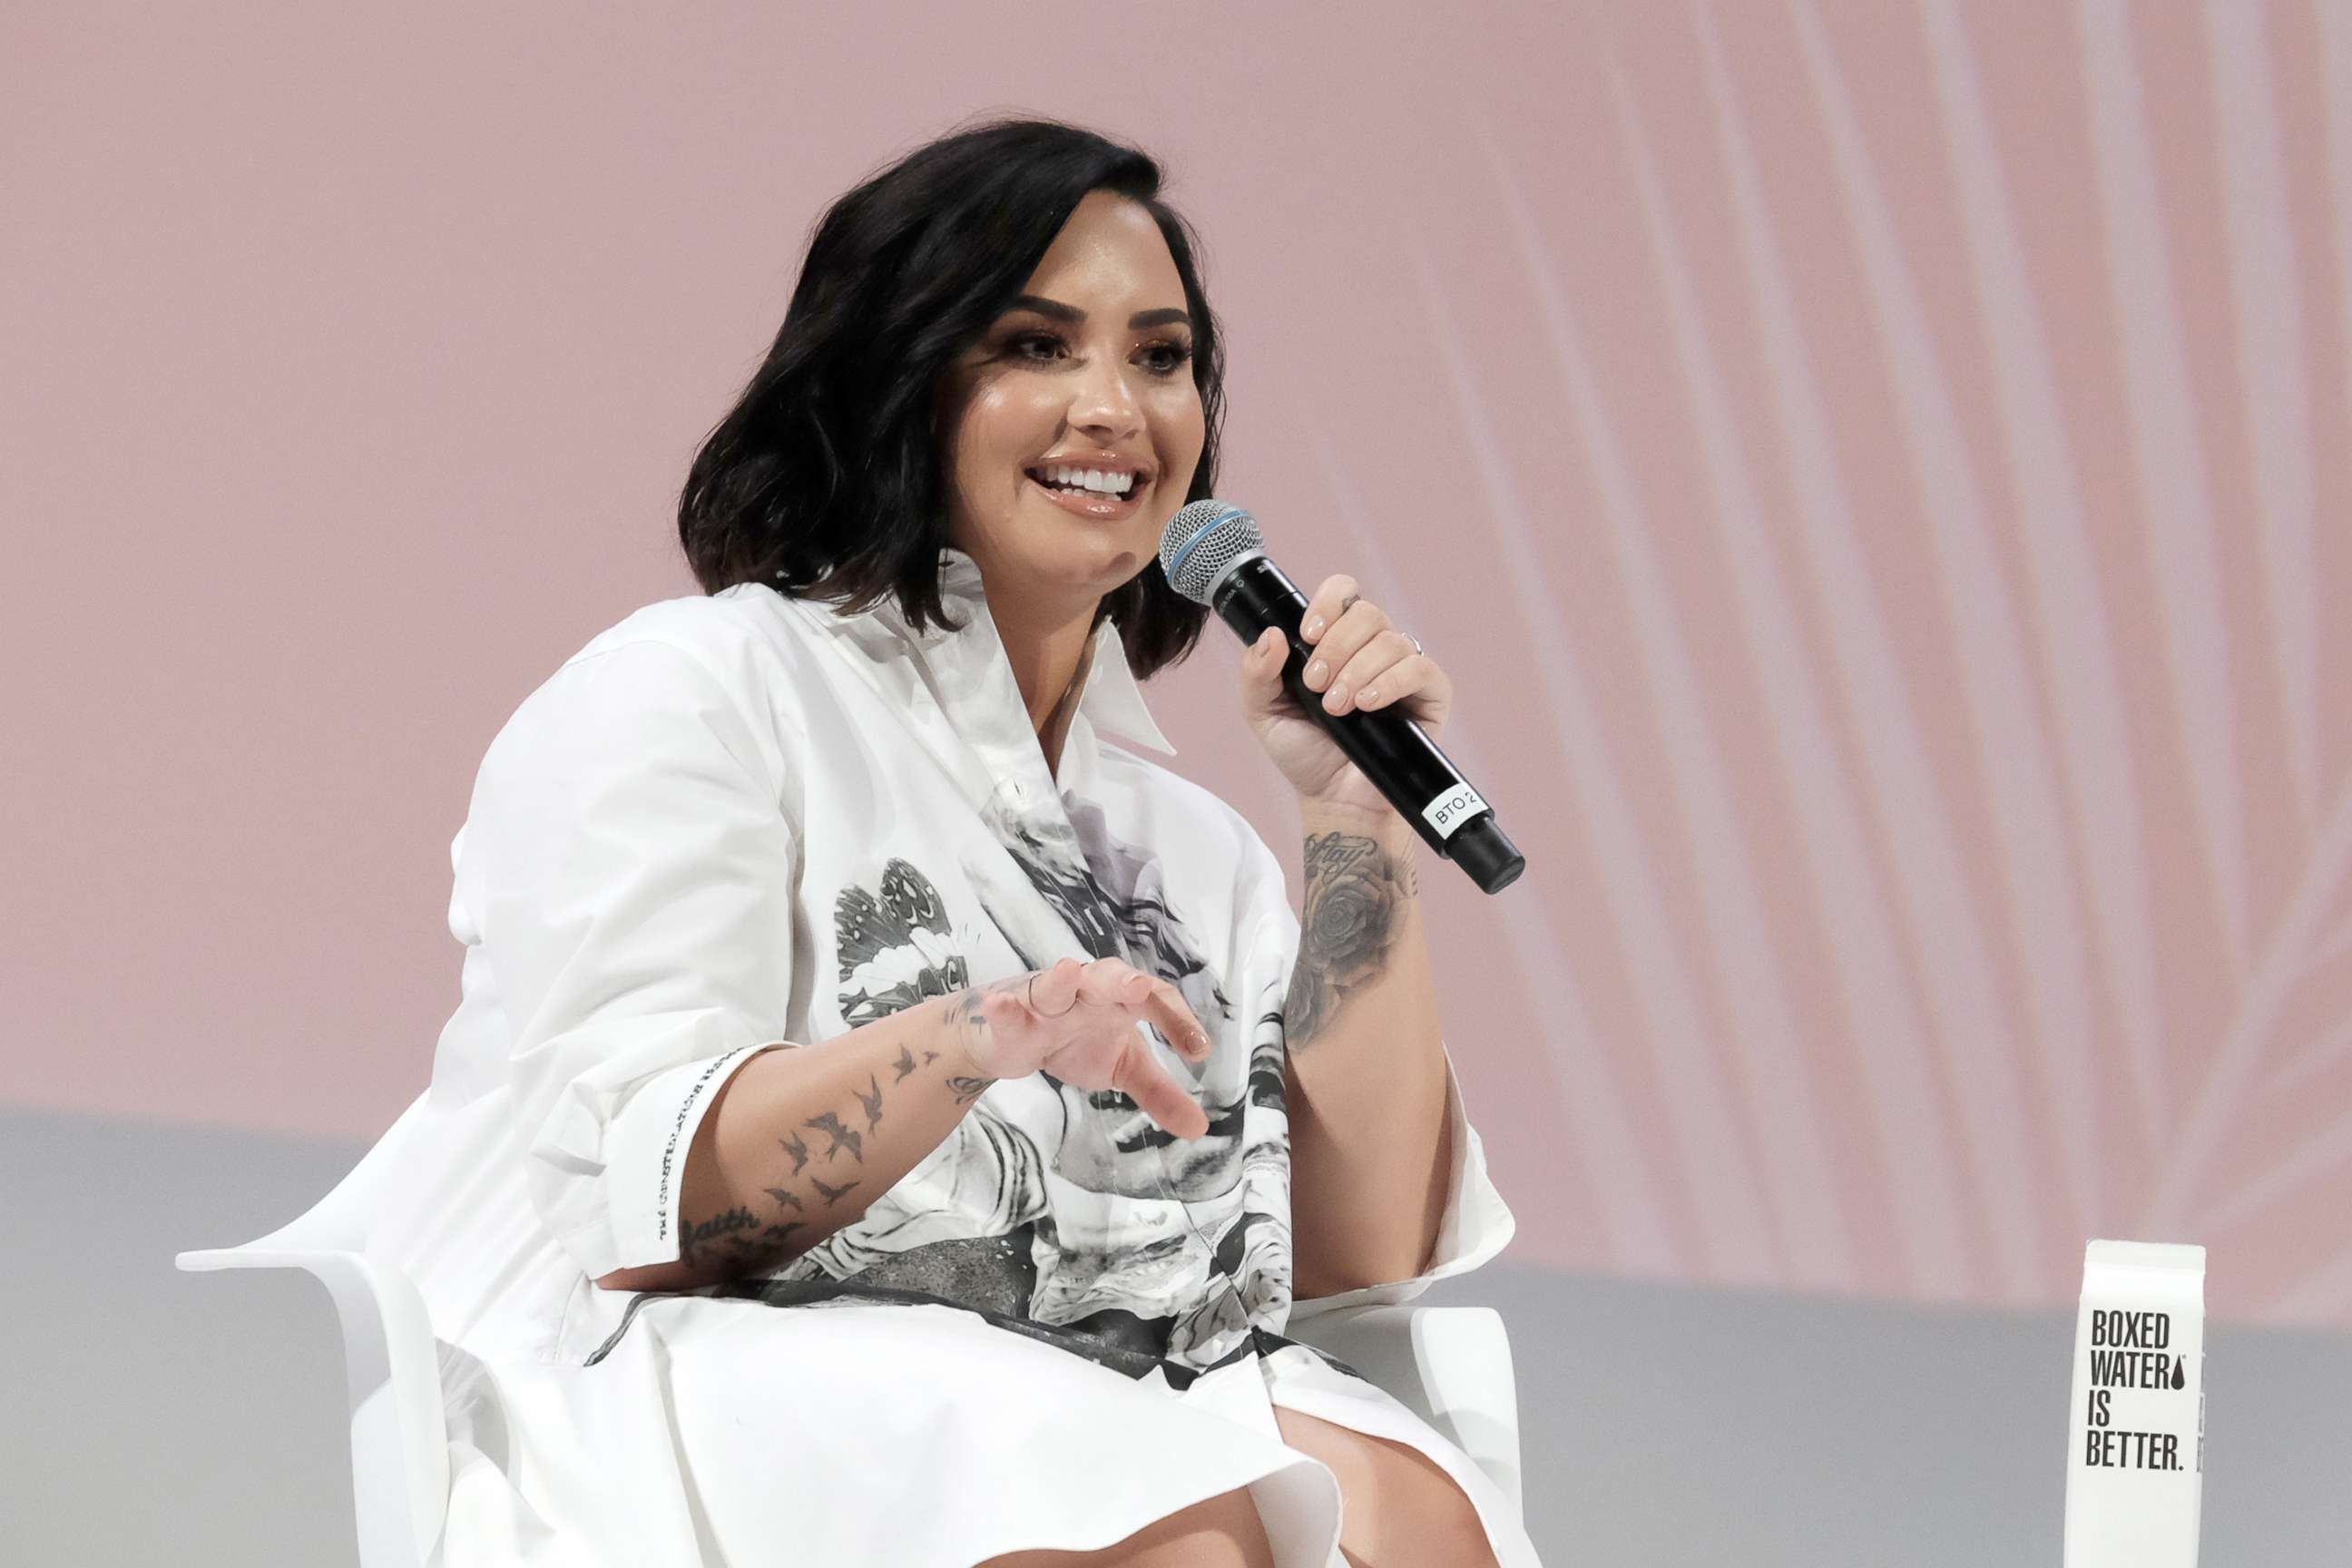 PHOTO: Singer Demi Lovato attends the 2019 Teen Vogue Summit at Goya Studios, Nov. 2, 2019 in Hollywood, Calif.